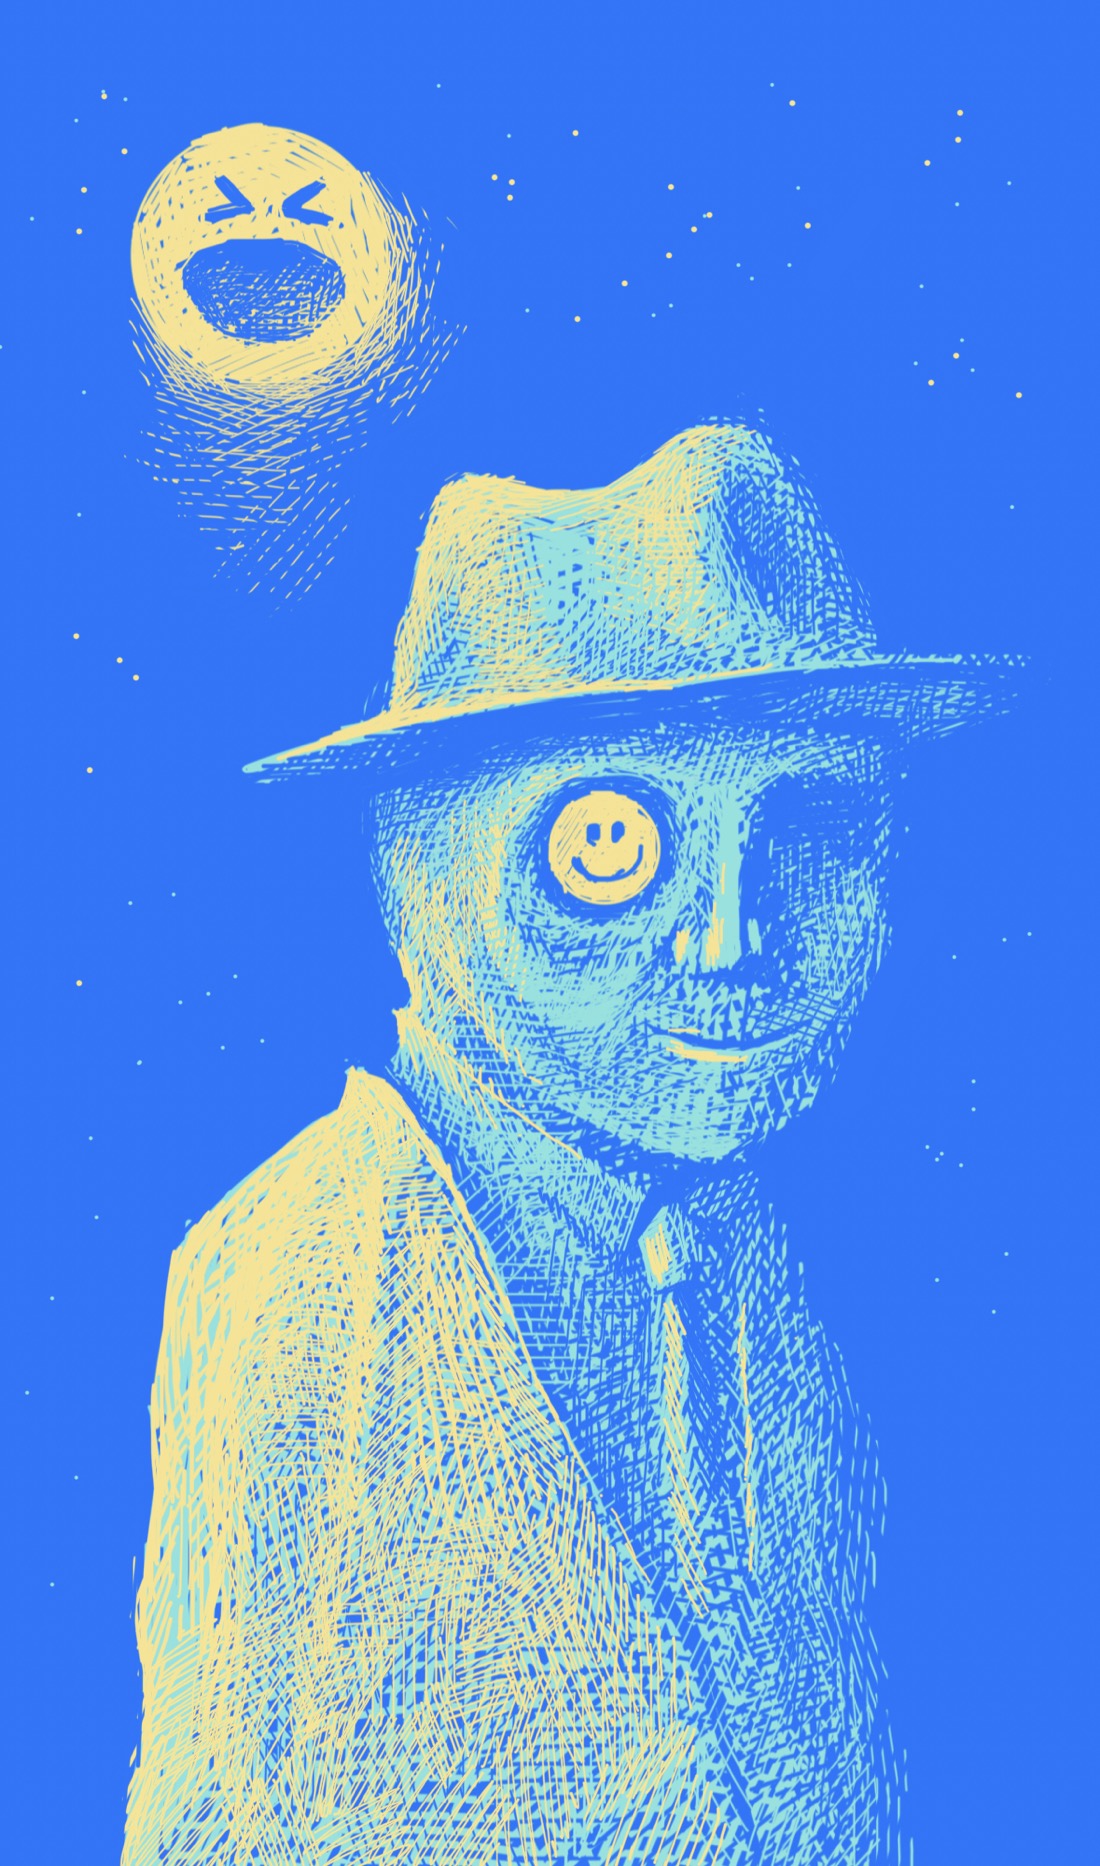 An eerie figure that seems to be carved from stone stands in the light of a moon that looks like the Facebook "haha" reaction. The figure has no ears, a strange smile, and wears a suit and fedora. One side of the figure's face is hidden in shadow; on the side that isn't, there's a smiley face instead of an eye.